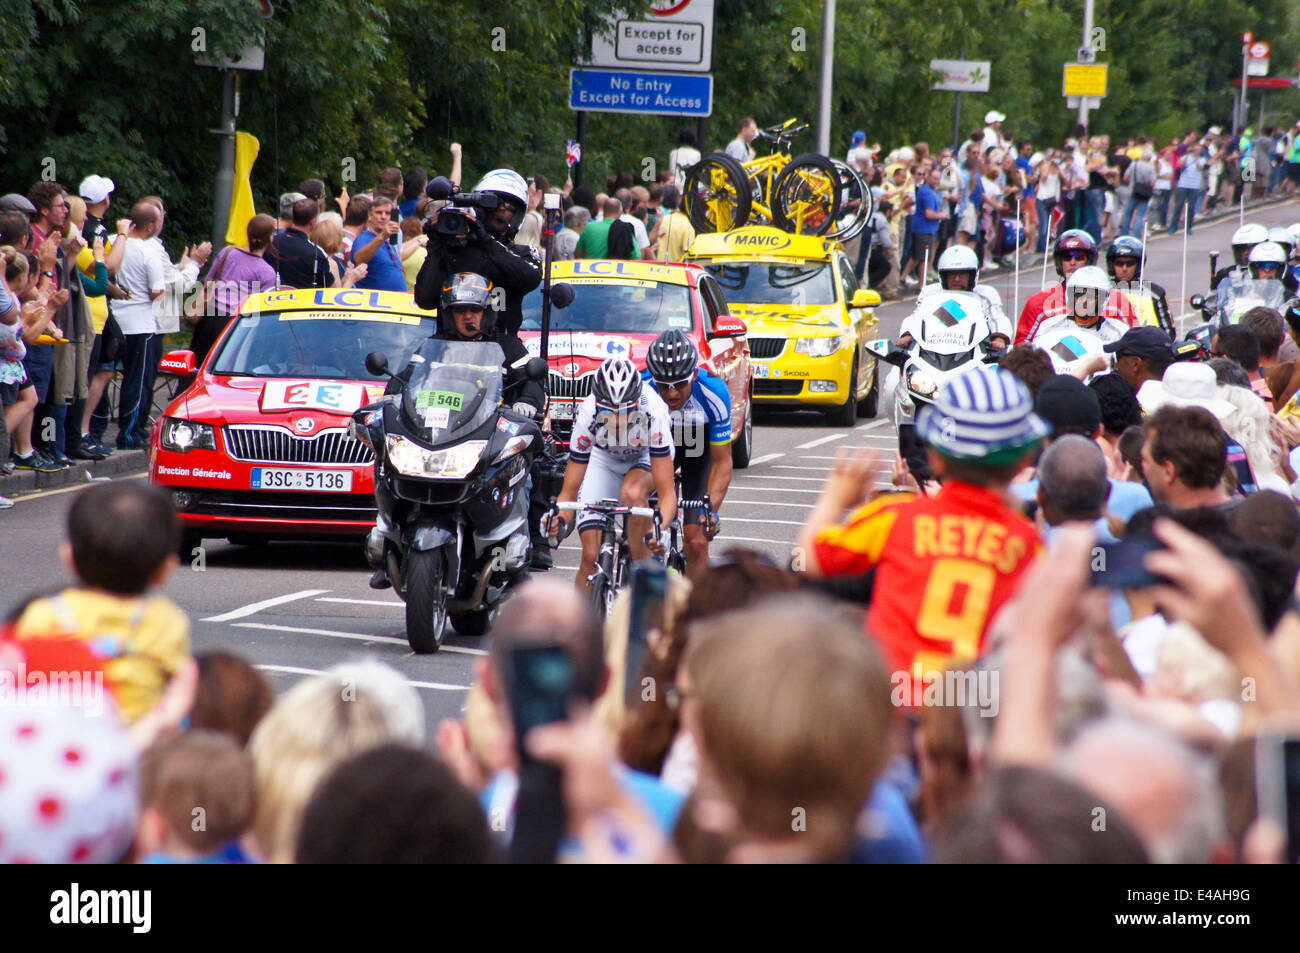 Woodford, London, UK. 07th July, 2014. Tour de France Stage 3: Hundreds line the route as Jean-Marc Rideau (in front) and Jan Barta still in front after leading for the entire race.Woodford, London. Credit:  Mark Dunn/Alamy Live News Stock Photo